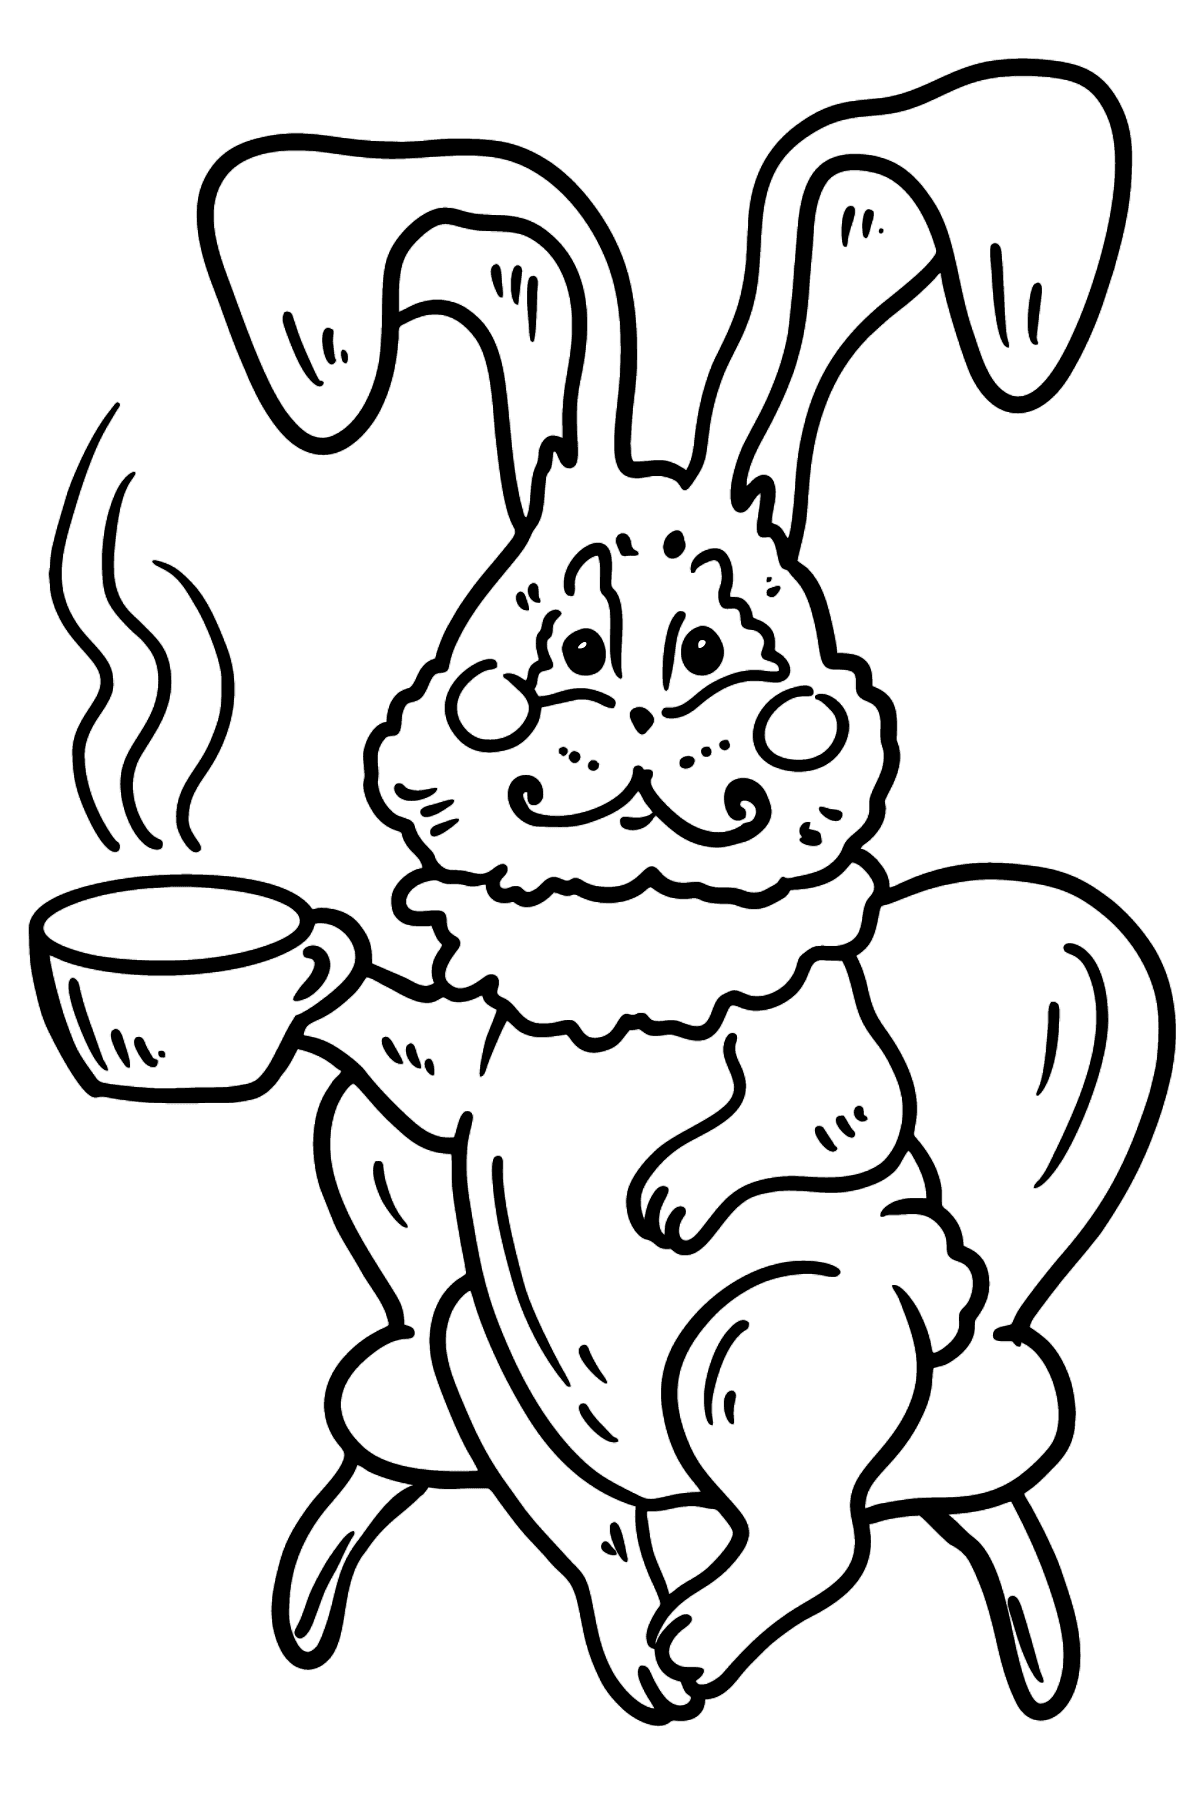 Bunny Sitting coloring page - Coloring Pages for Kids